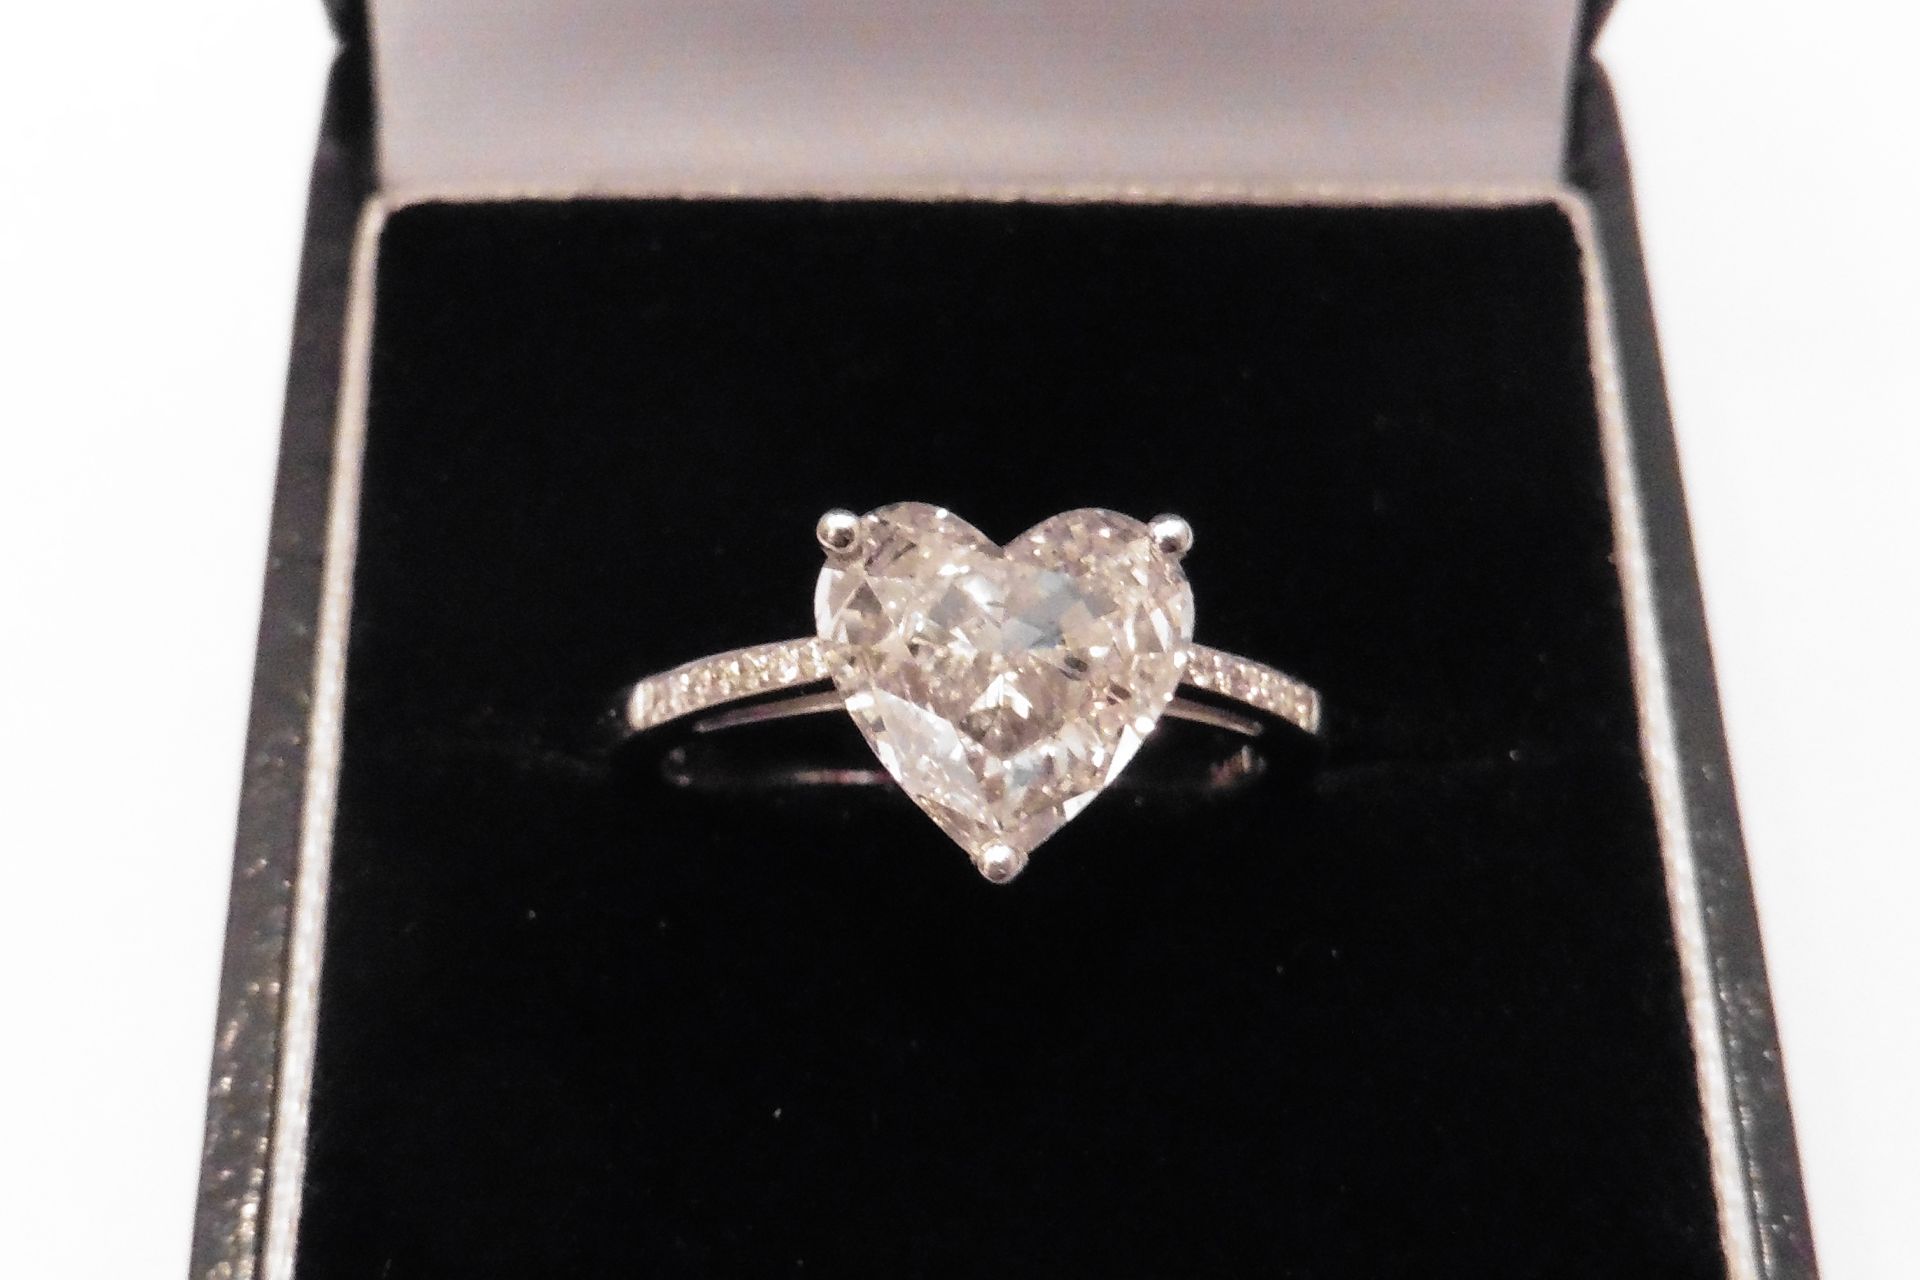 Tiffany style Heart shaped solitaire ring with a gorgeous heart shaped diamond weighing 2.08ct of G